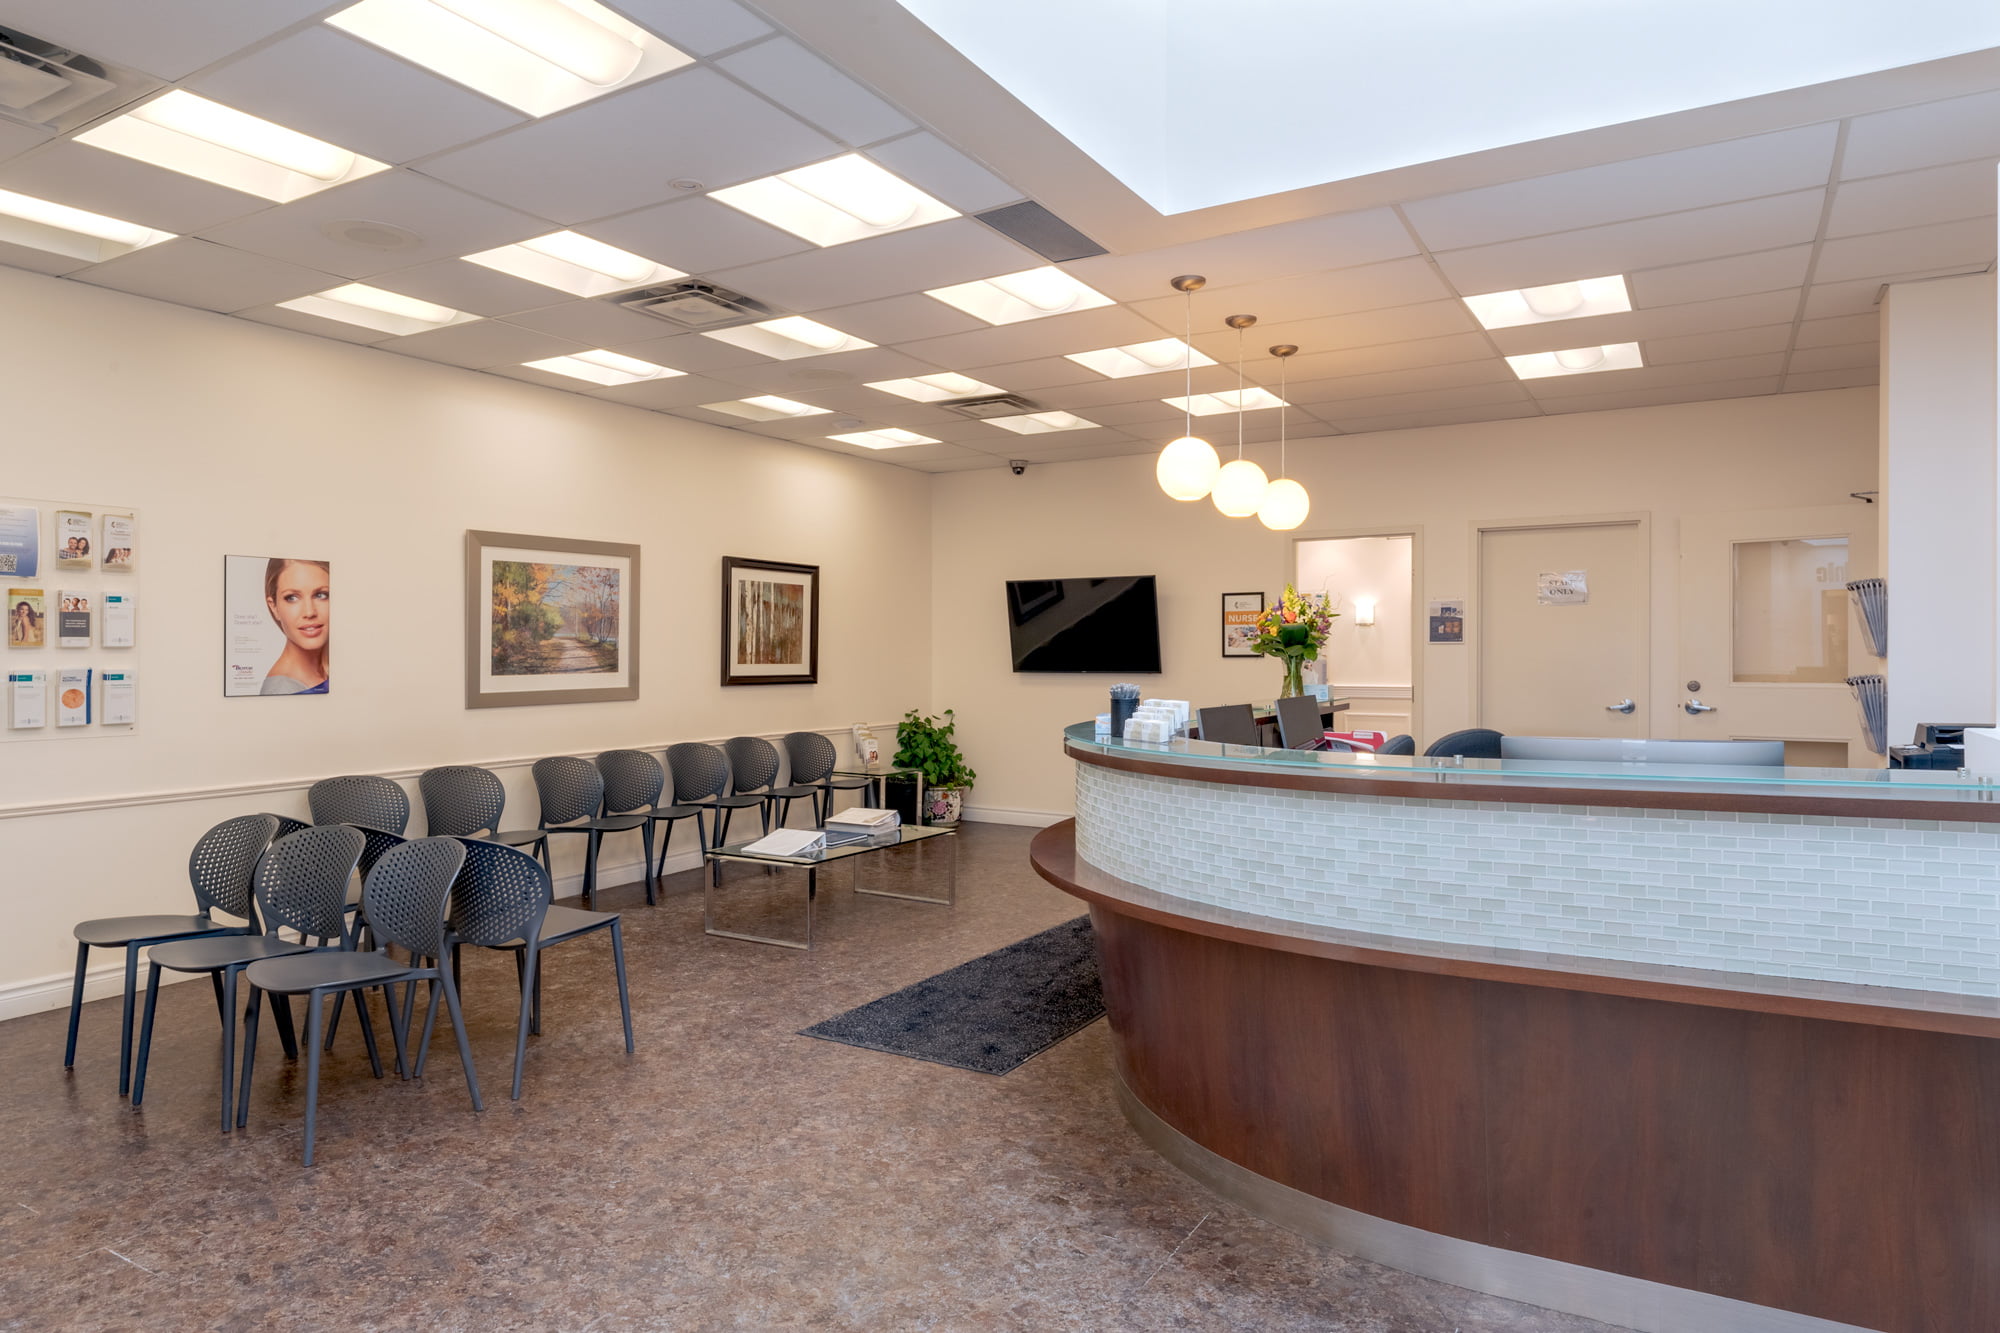 Cosmetic Clinic Photography